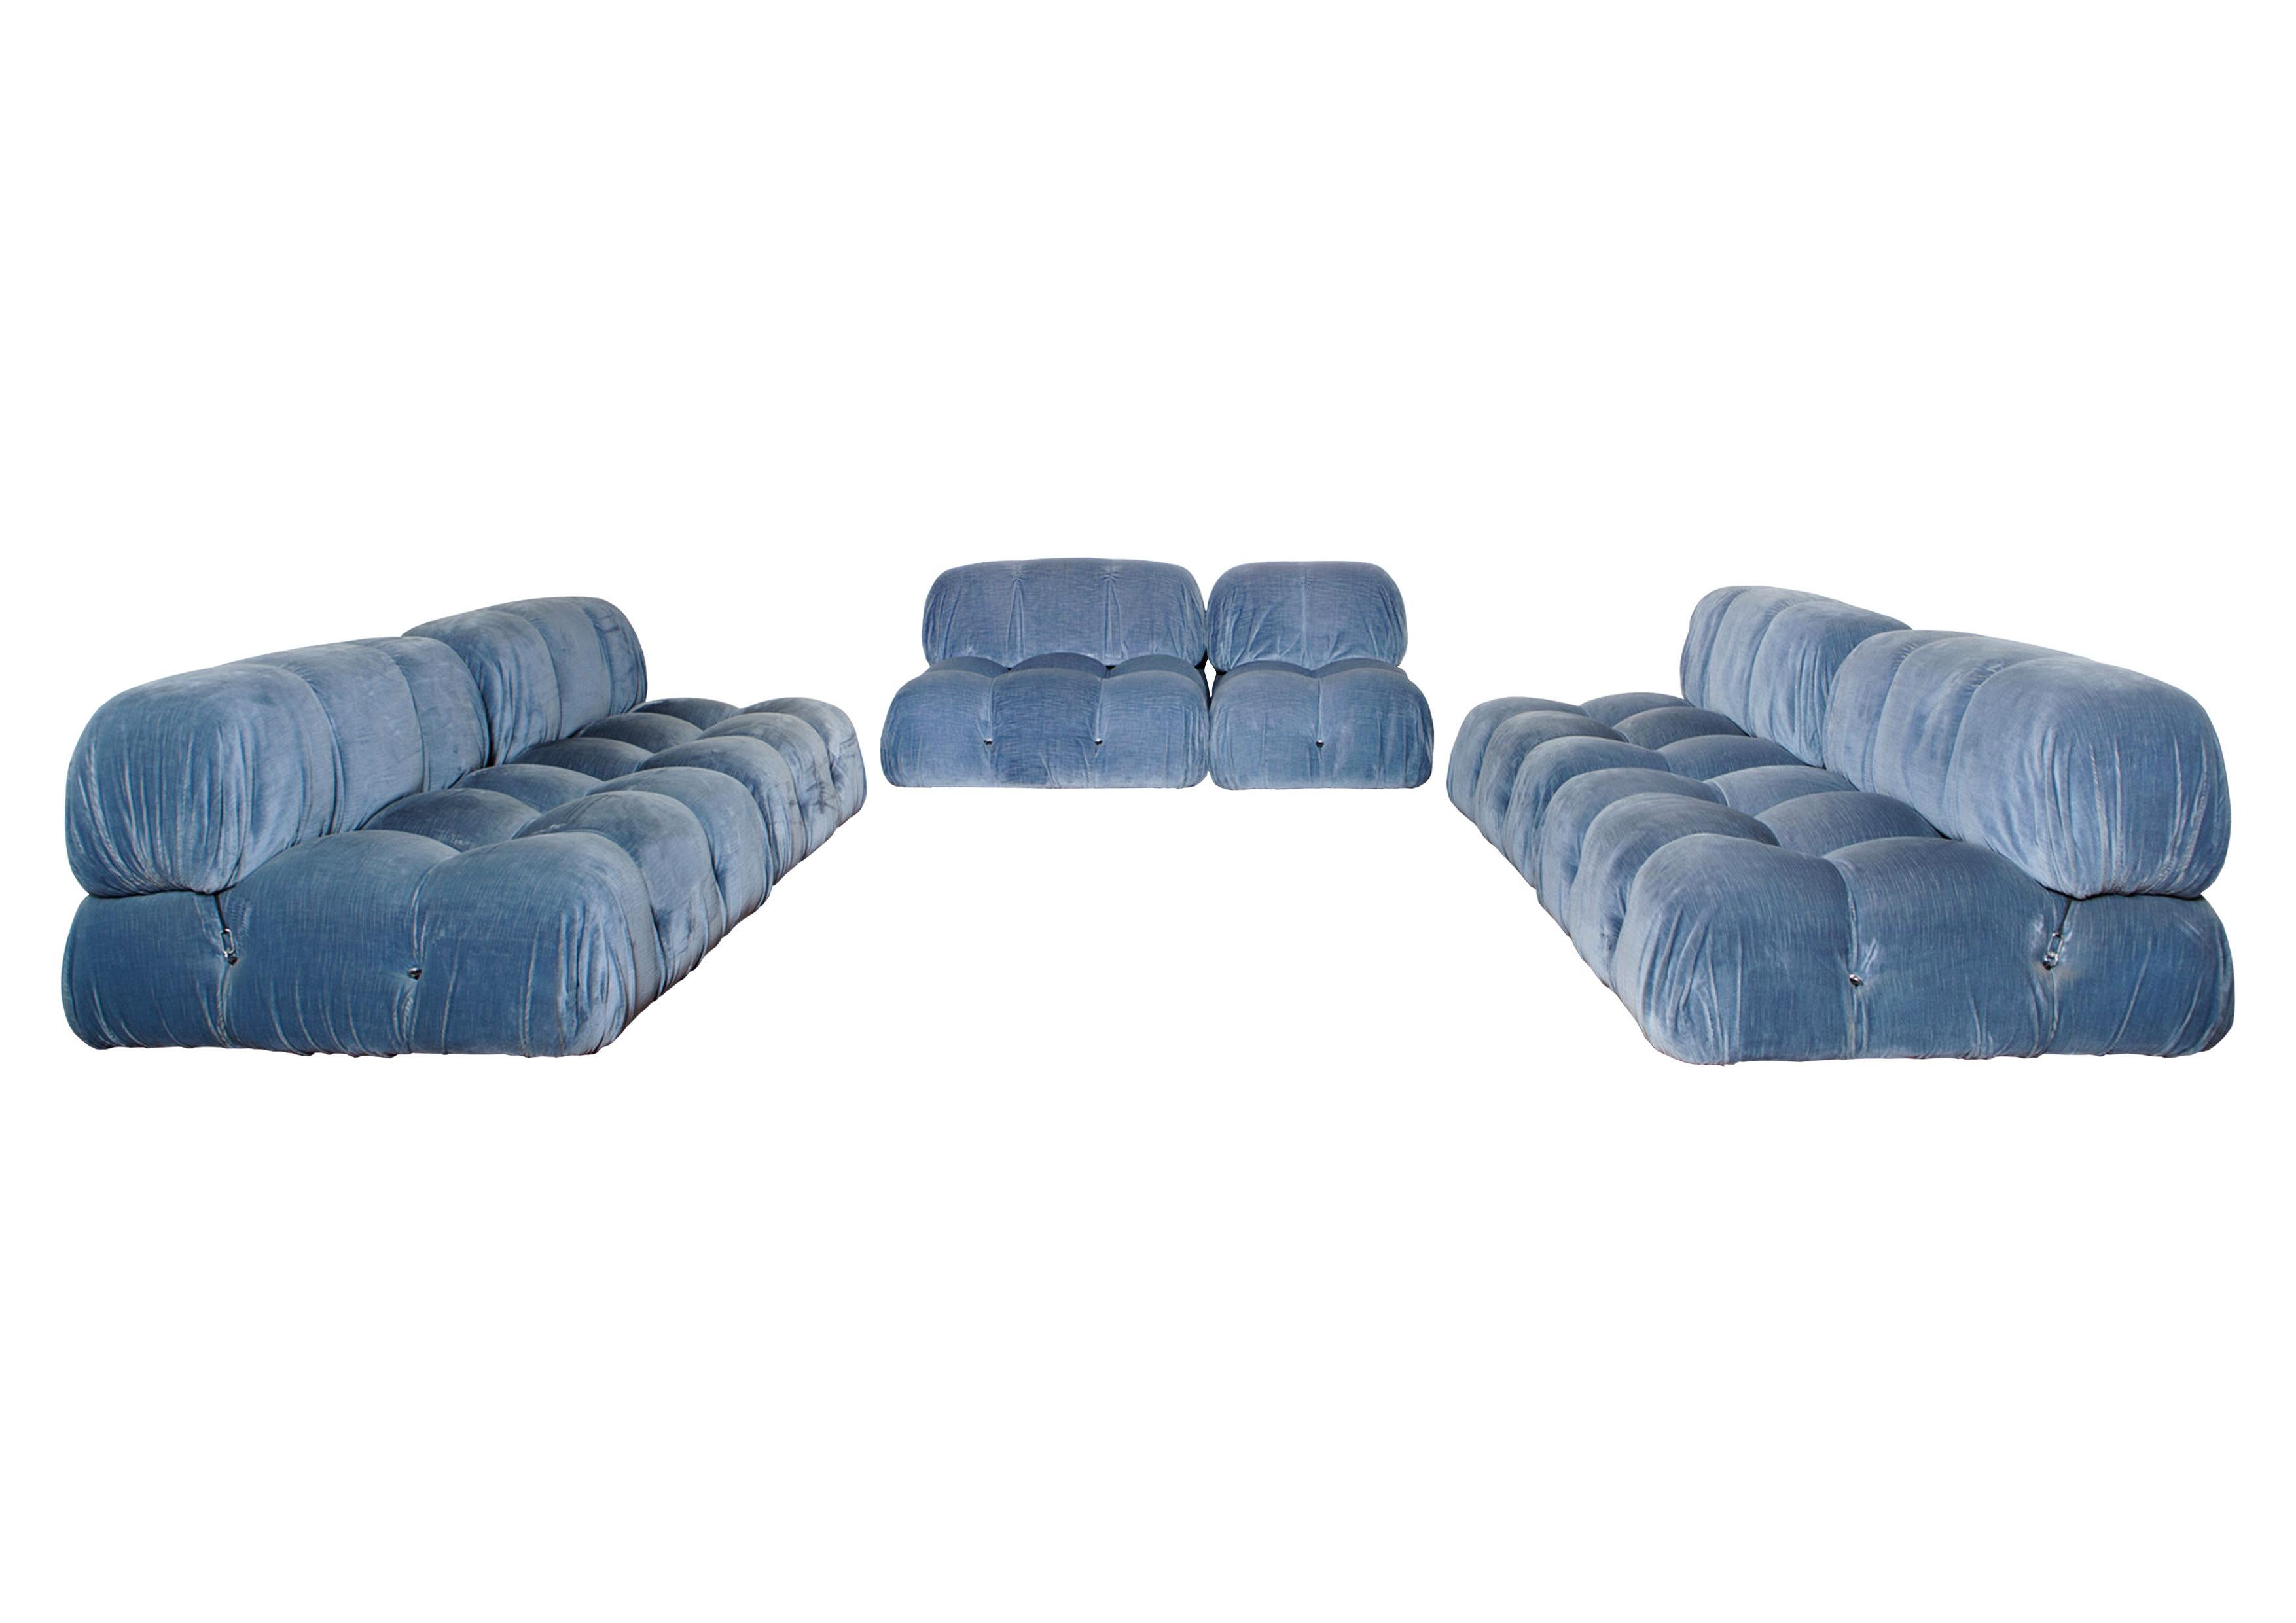 Camaleonda sofa, designed by Mario Bellini and manufactured by B&B Italia in 1972.
The set features seven modules with backrest (four big modules and three small ones) and one armrest.
High-quality azure linen velvet upholstery.
Fully restored in